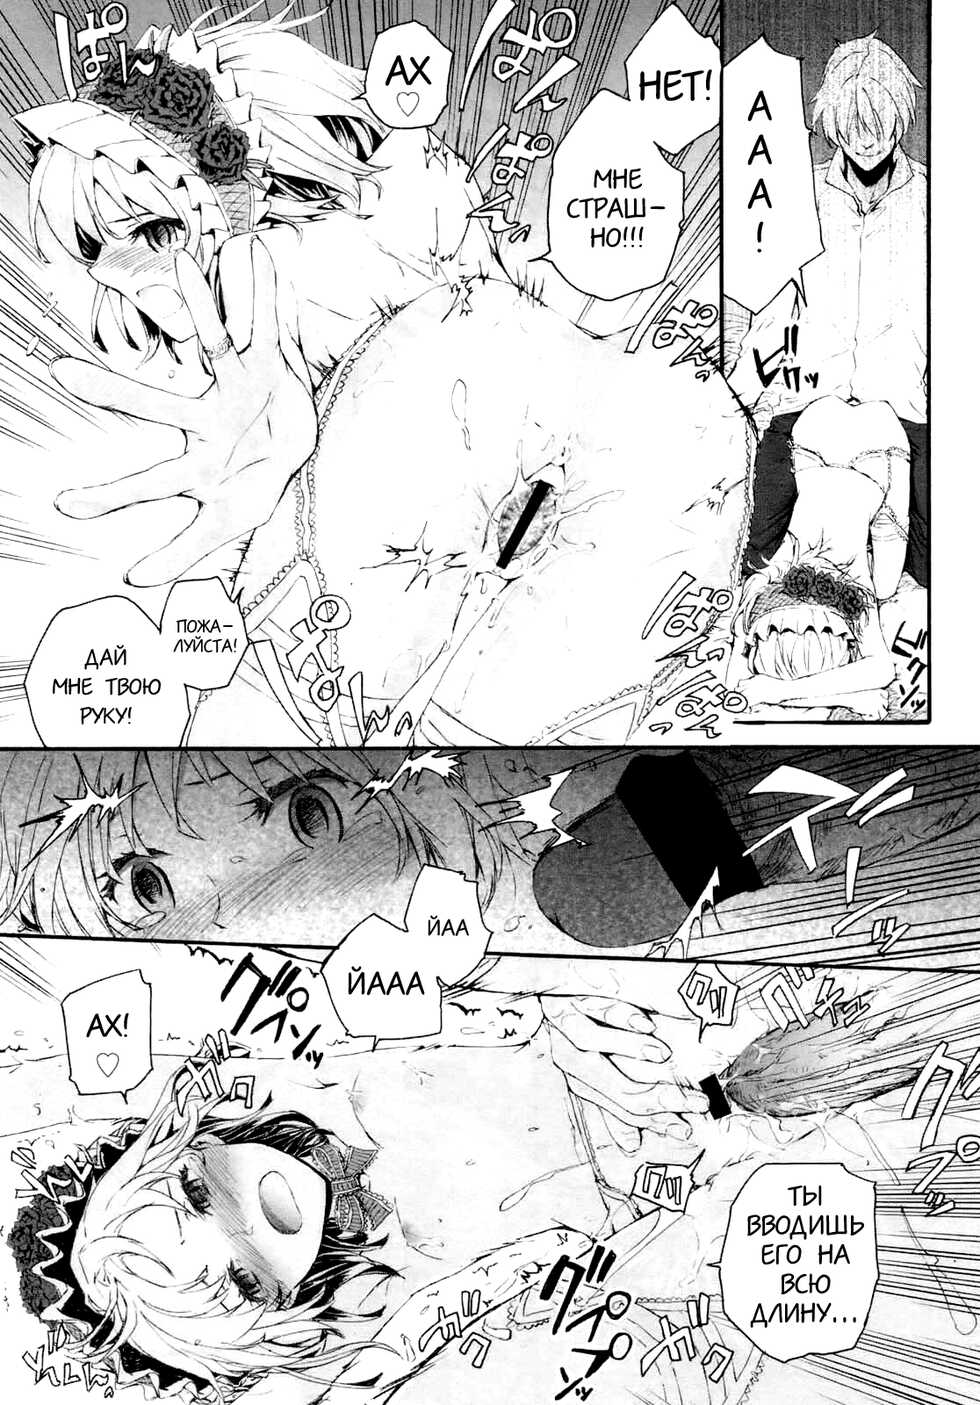 [Sumiya] Gothic | Готика (COMIC LO 2010-09) [Russian] [LoliconTeam] - Page 17